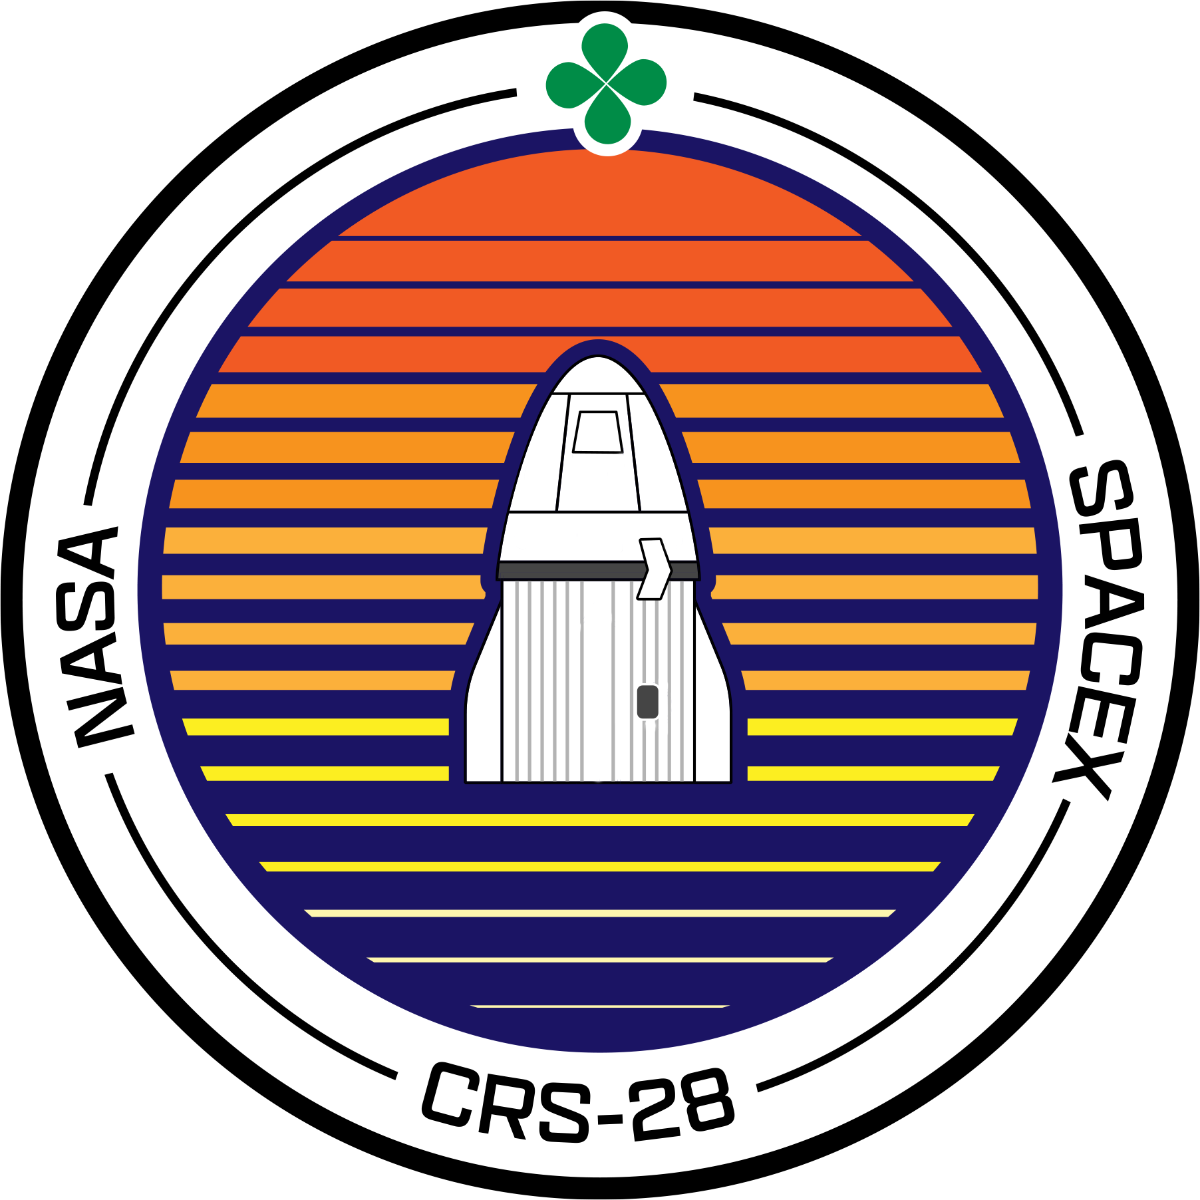 Mission patch for Dragon CRS-2 SpX-28